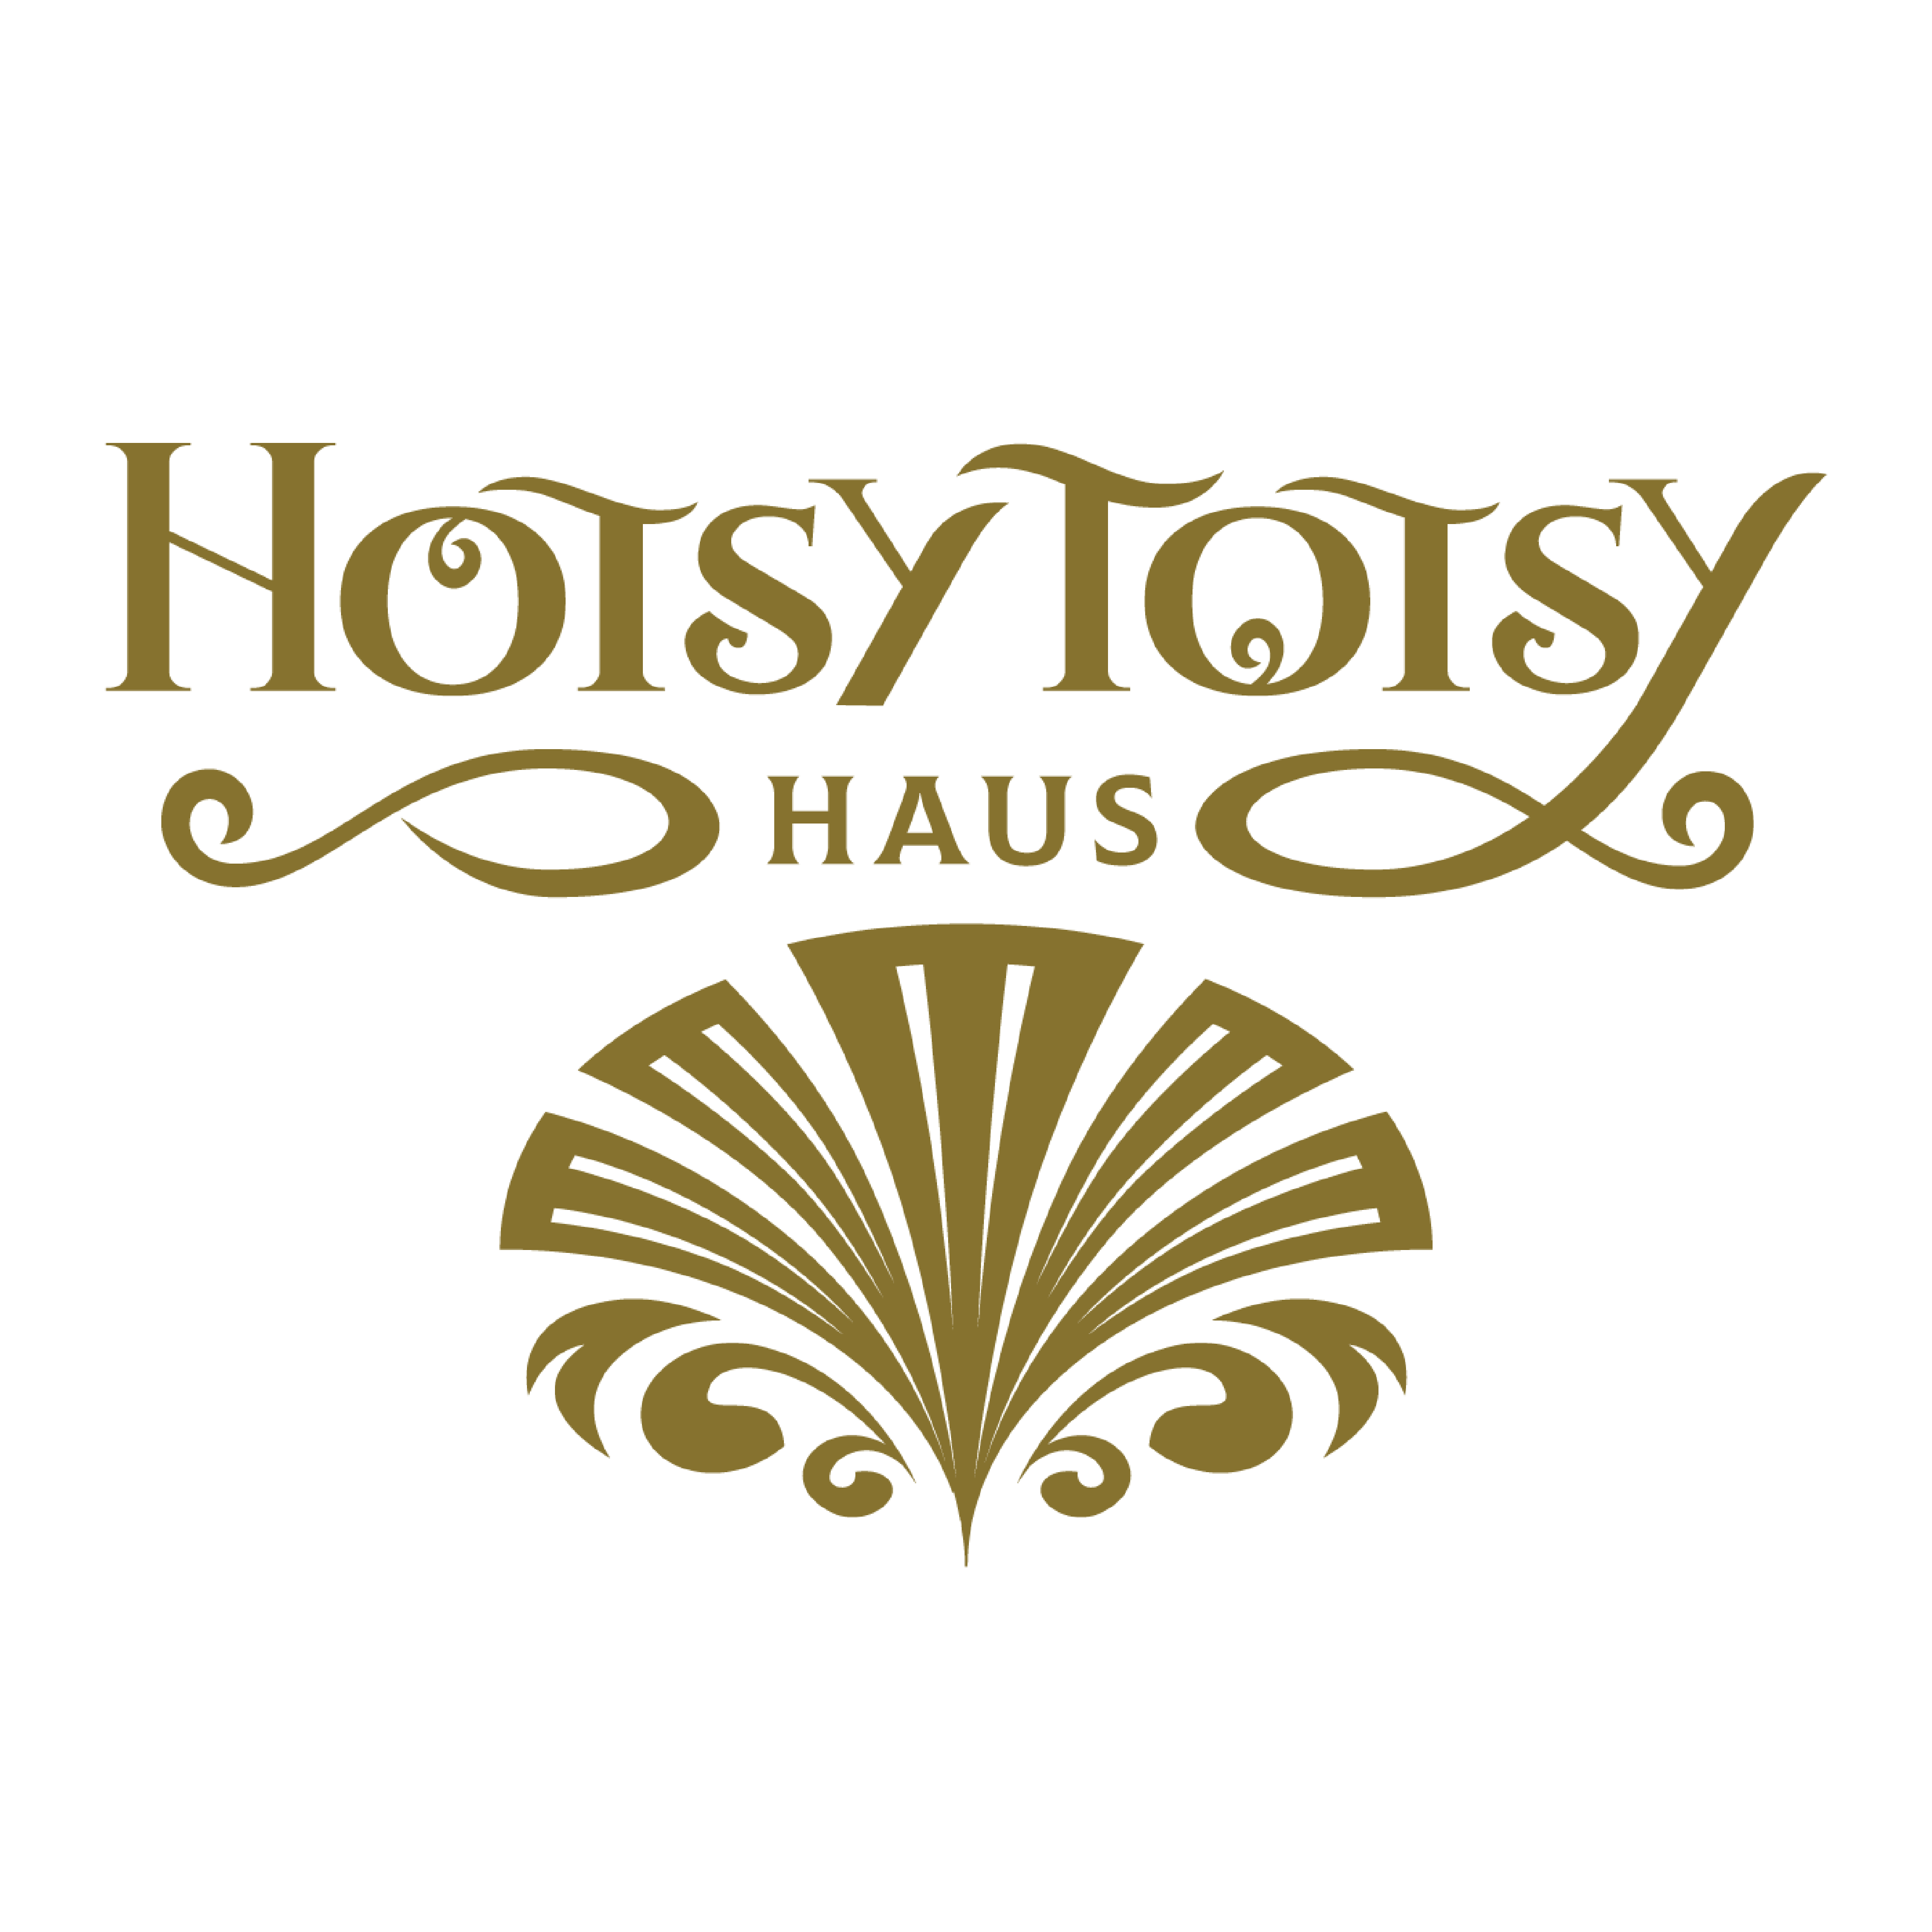 "Hotsy Totsy Haus" in gold with a gold seashell underneath